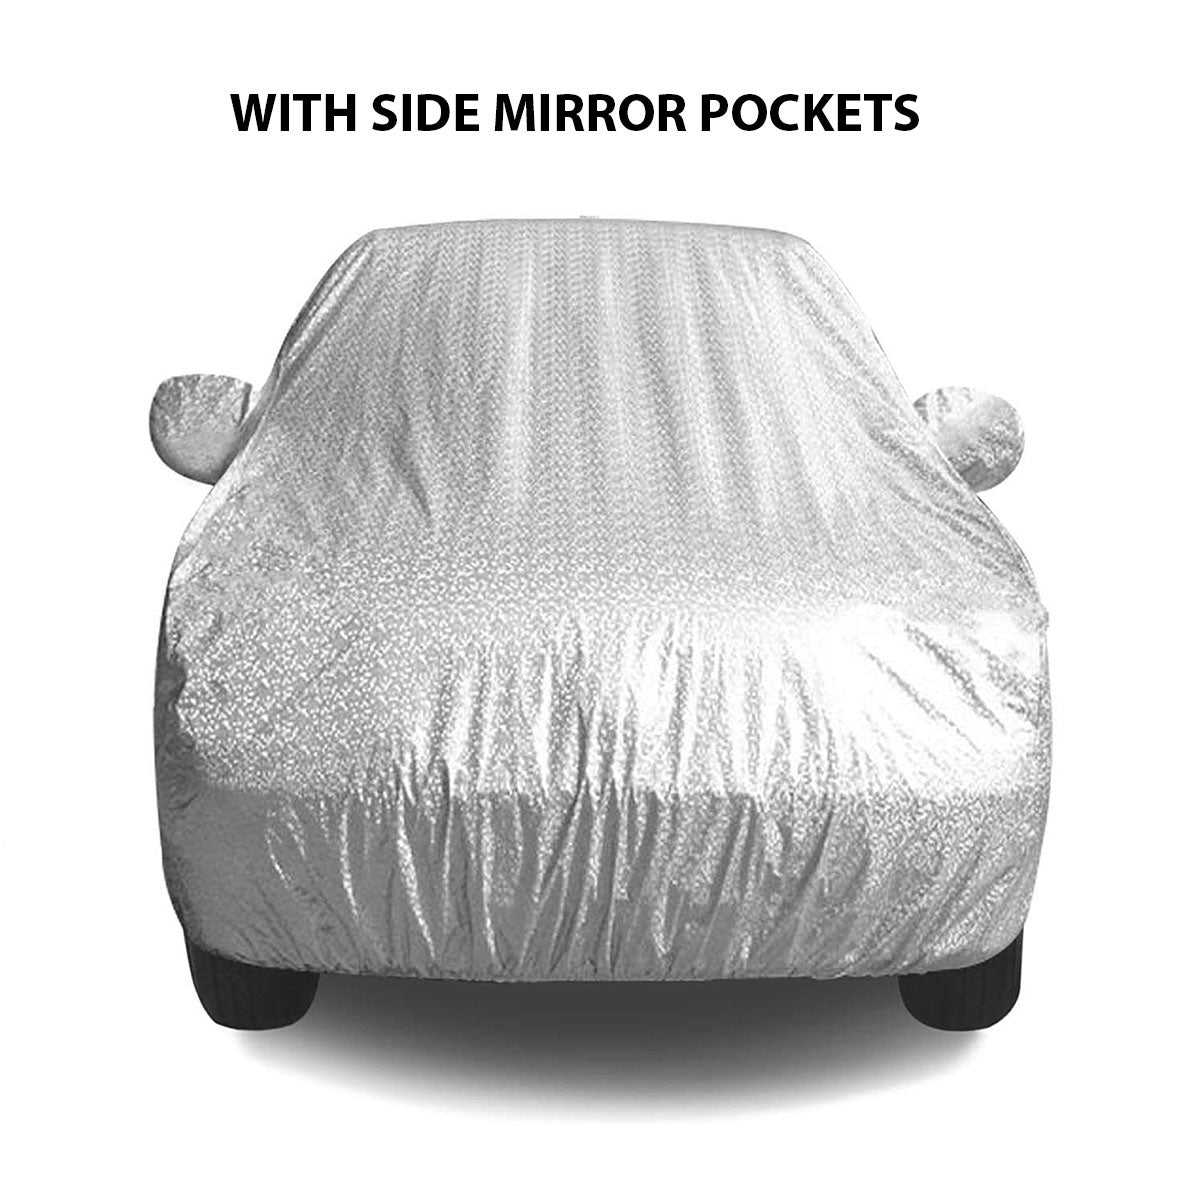 Oshotto Spyro Silver Anti Reflective, dustproof and Water Proof Car Body Cover with Mirror Pockets For Range Rover Autobiography